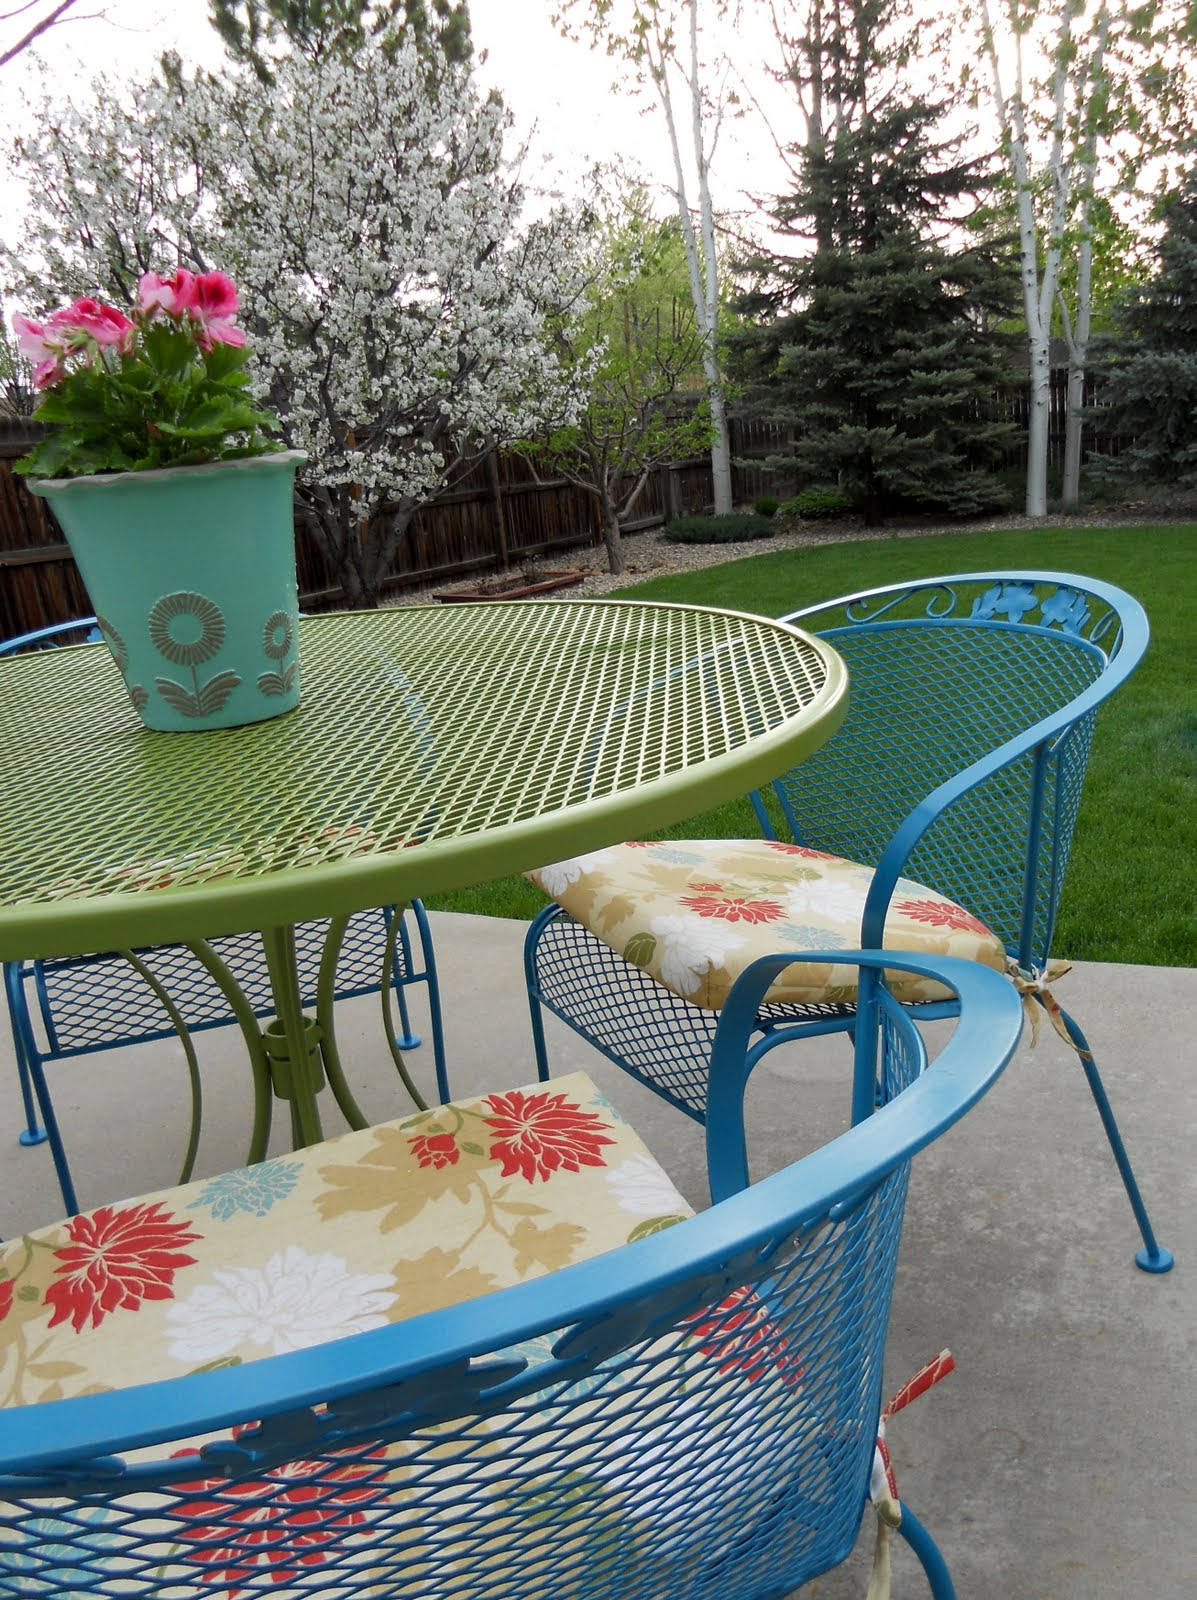 Just Another Hang Up Patio Furniture Redo - Painting Rod Iron Patio Furniture